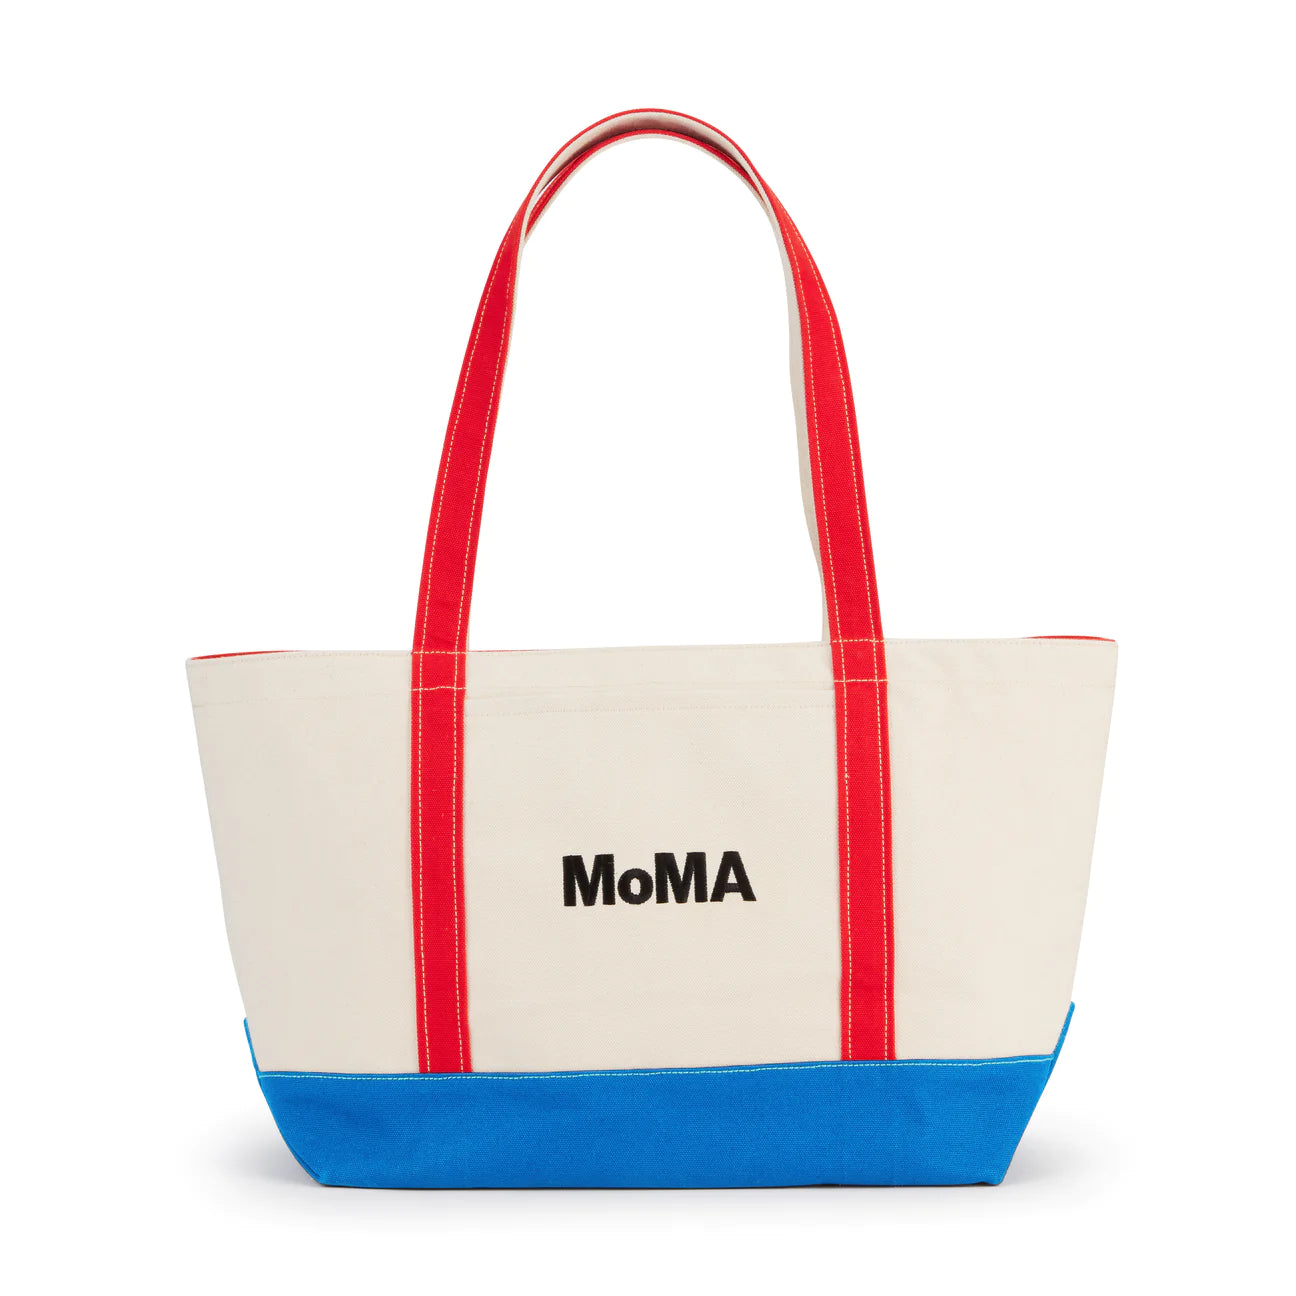 Herstory of Art Tote – MoMA Design Store